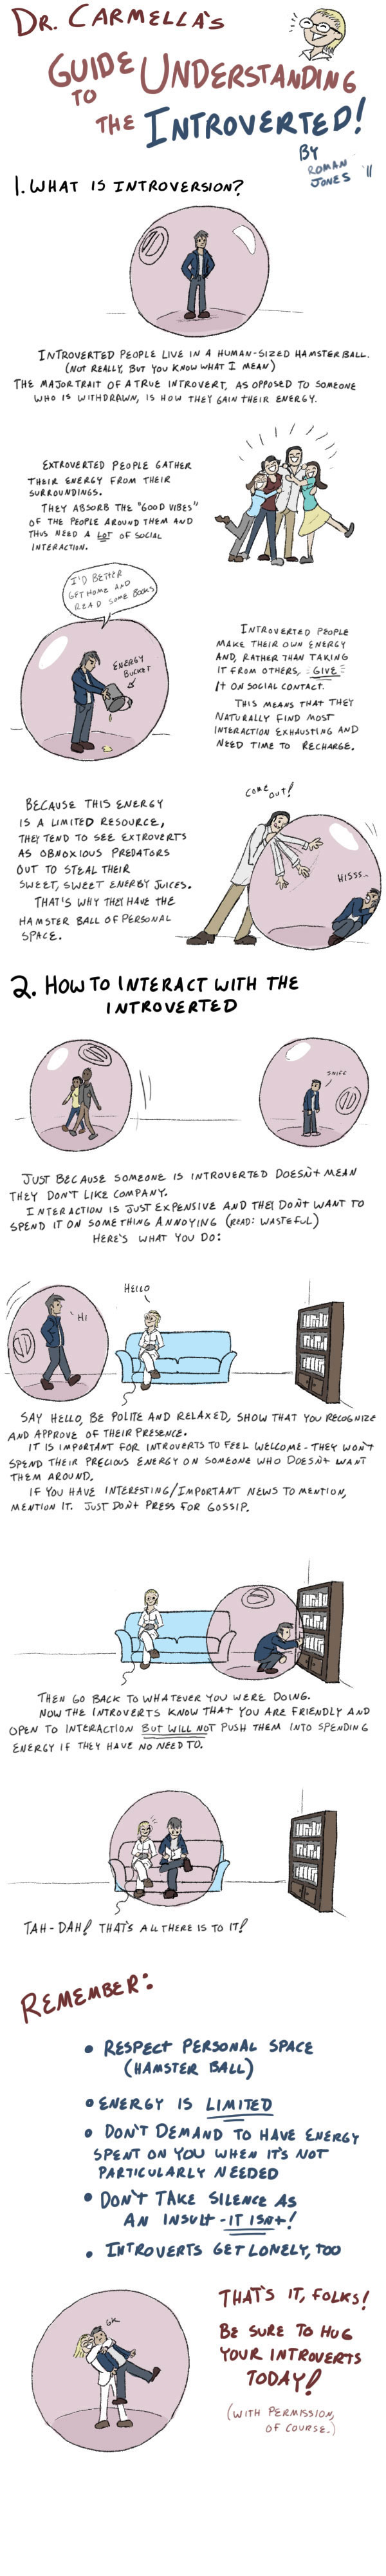 guide to understanding the introverted.jpg